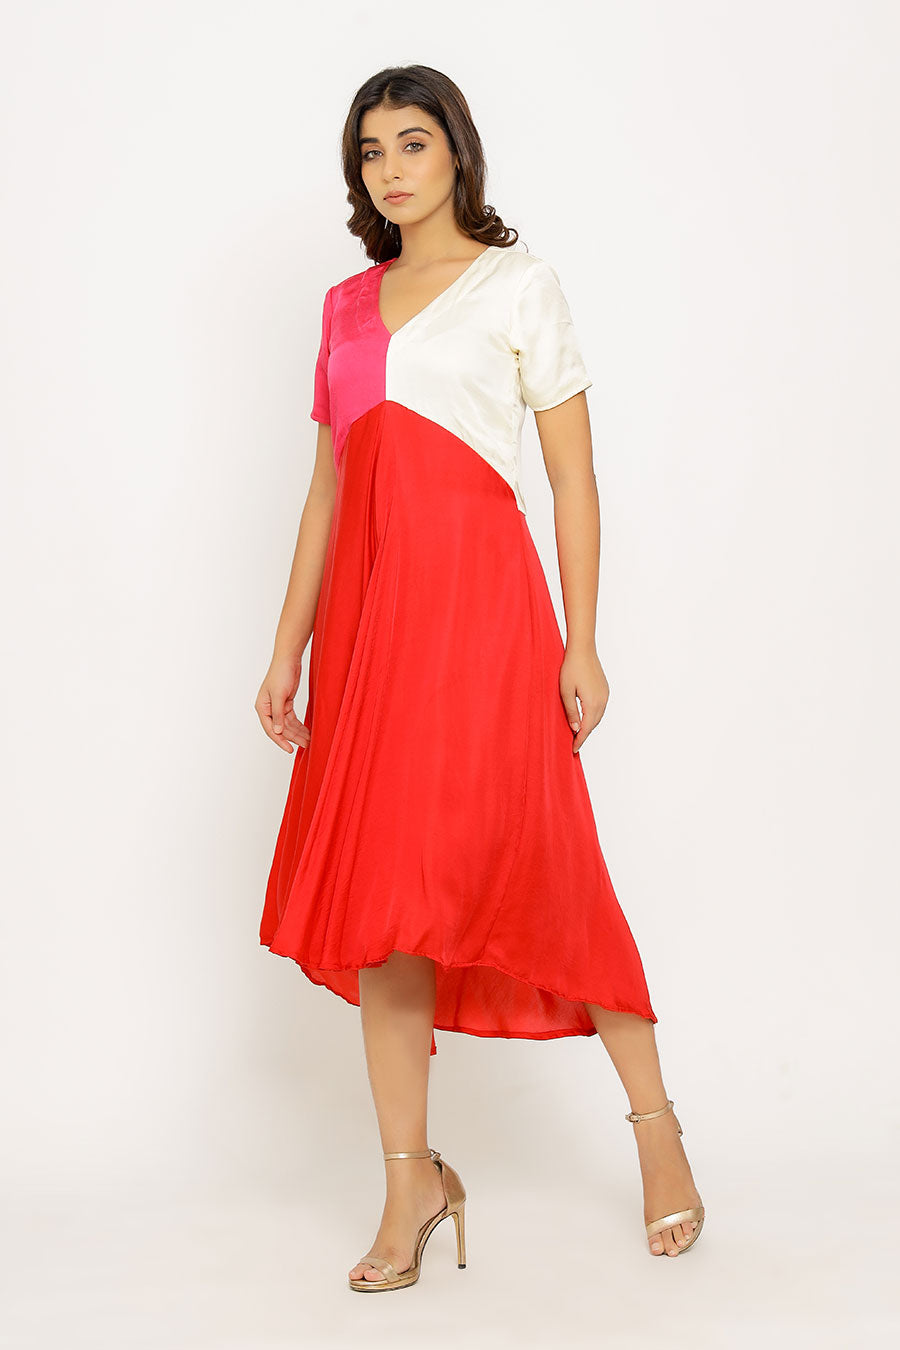 Red-Pink-White Colour Block Dress